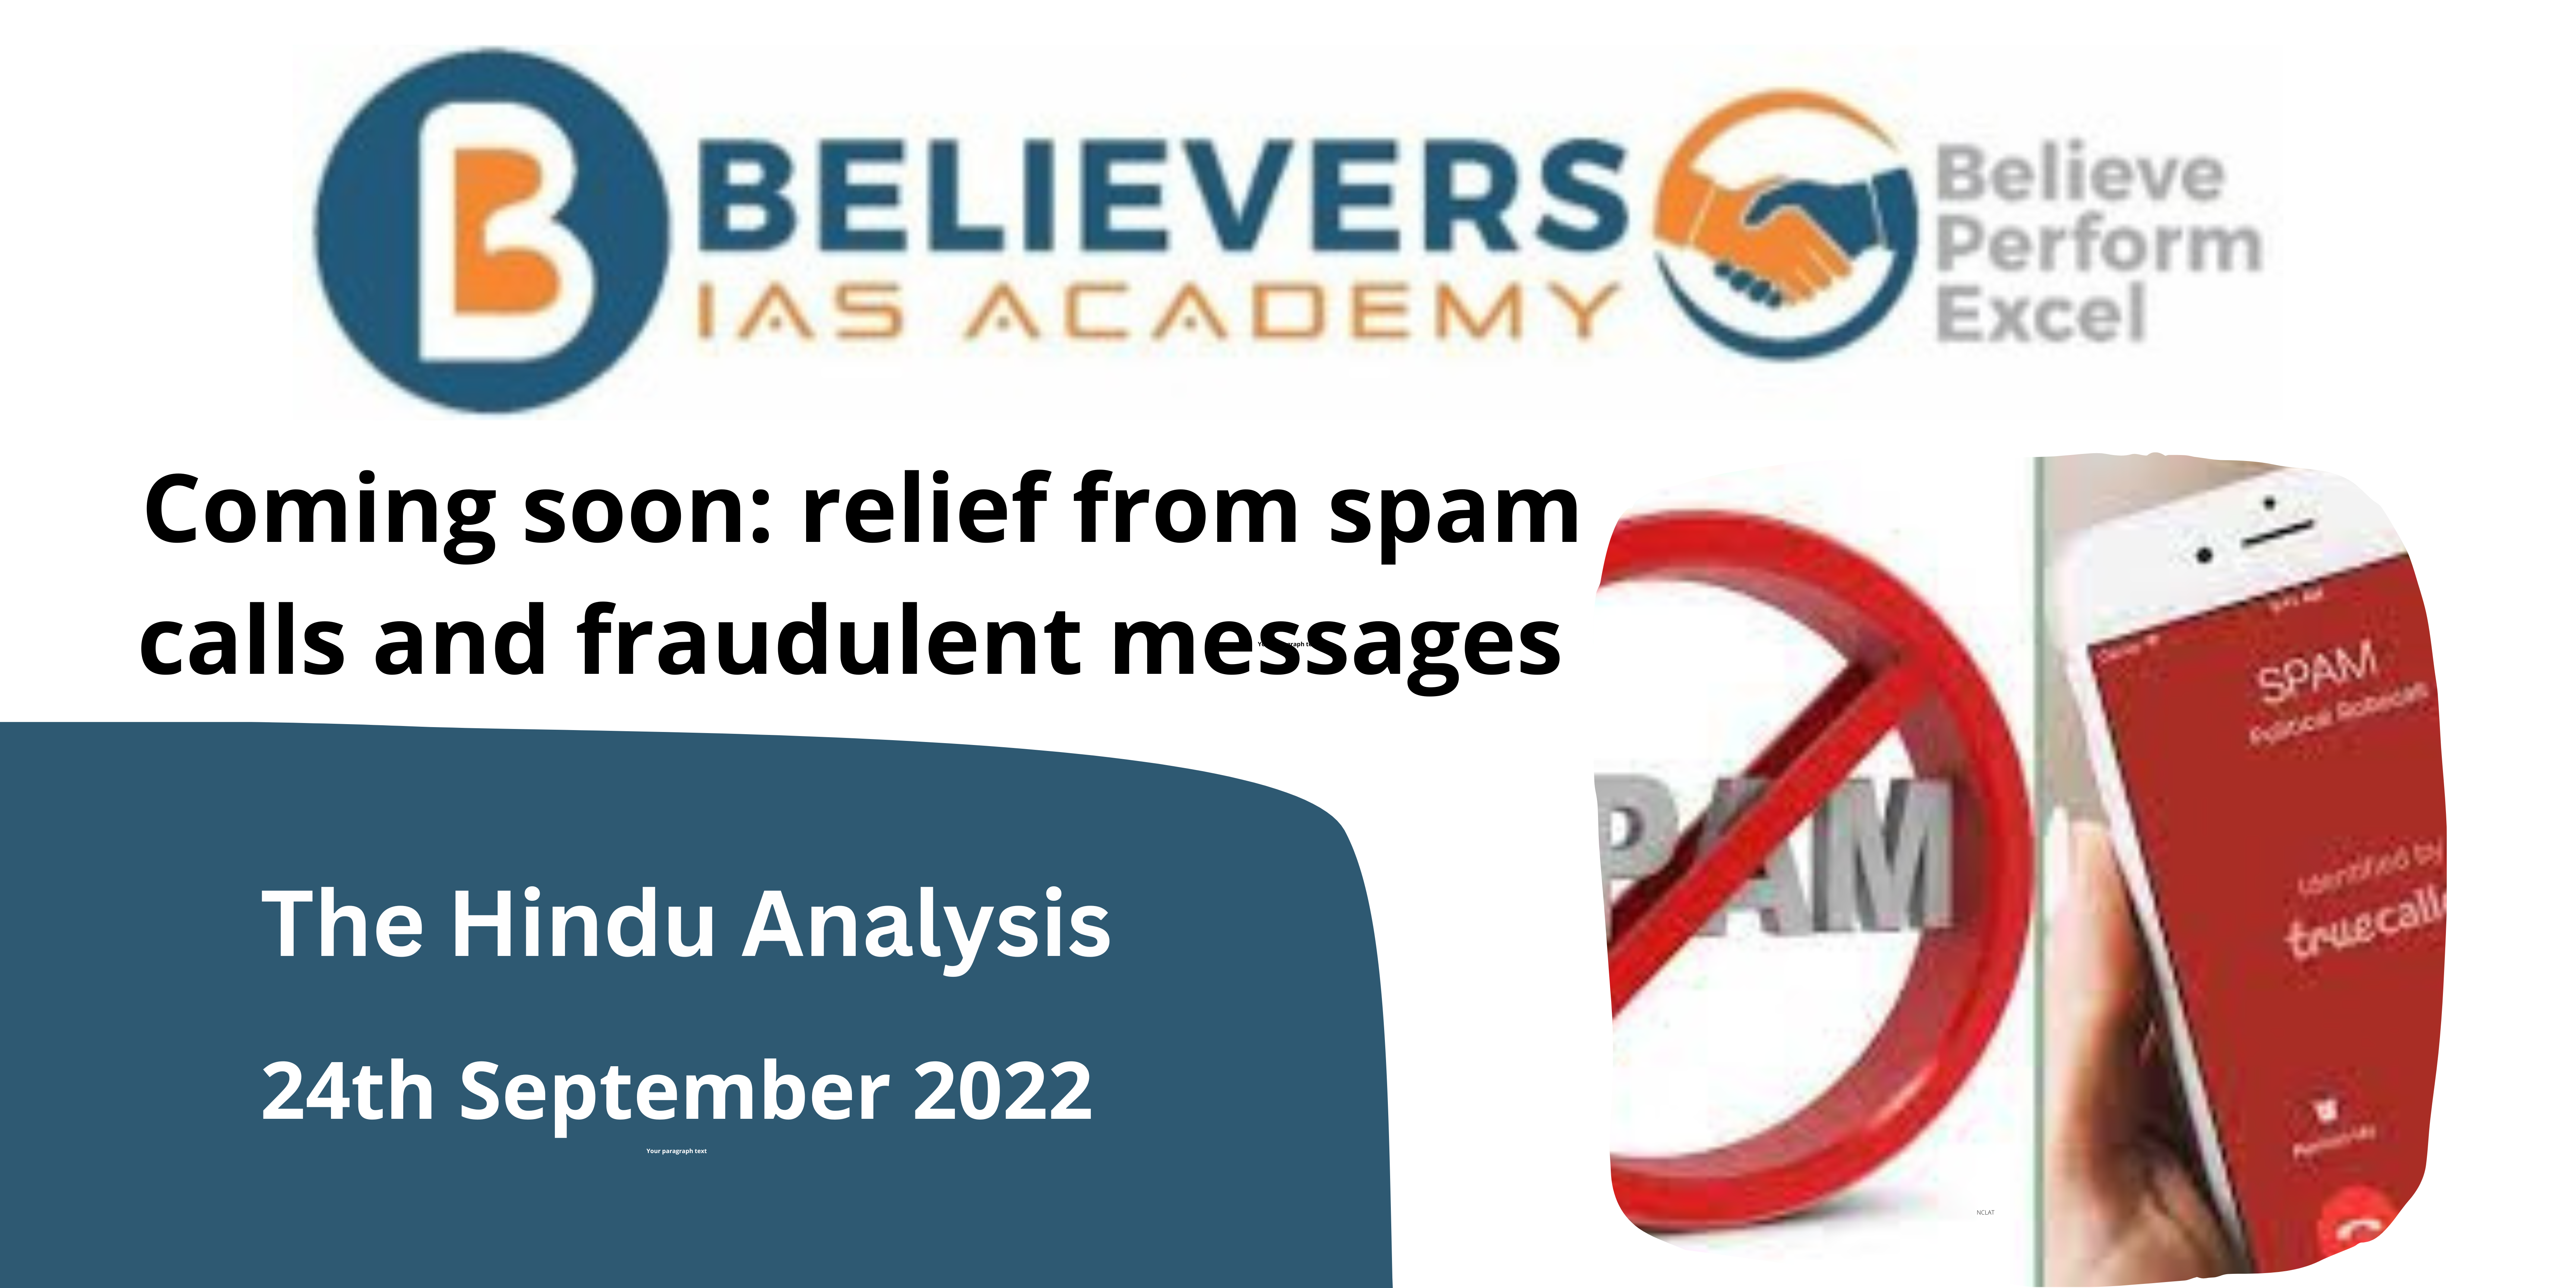 Coming soon: relief from spam calls and fraudulent messages